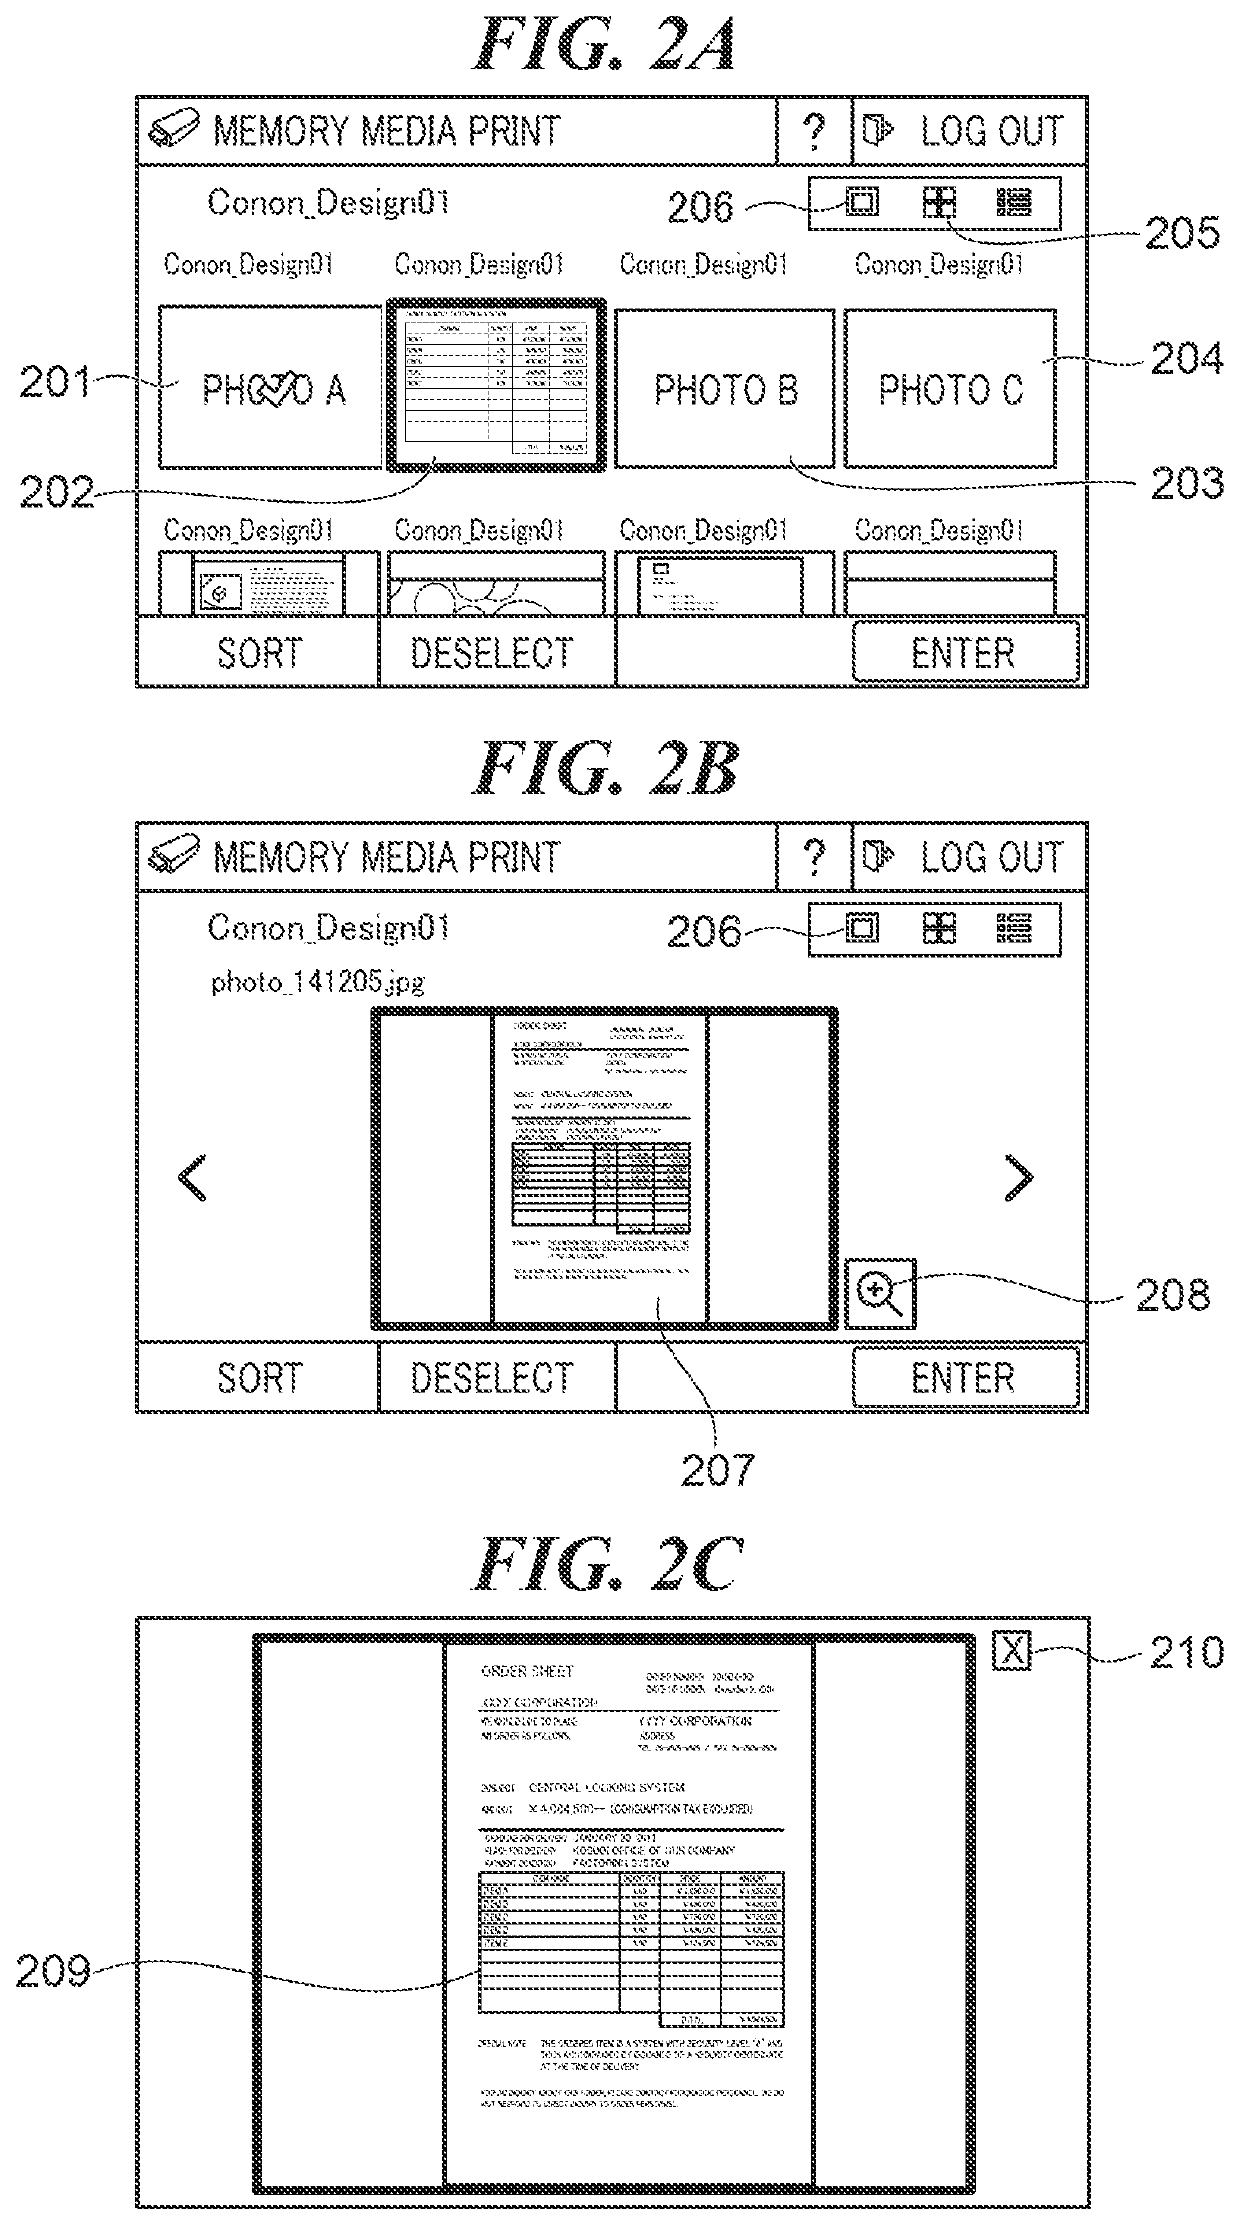 Image processing apparatus with direct print function, control method therefor, and storage medium